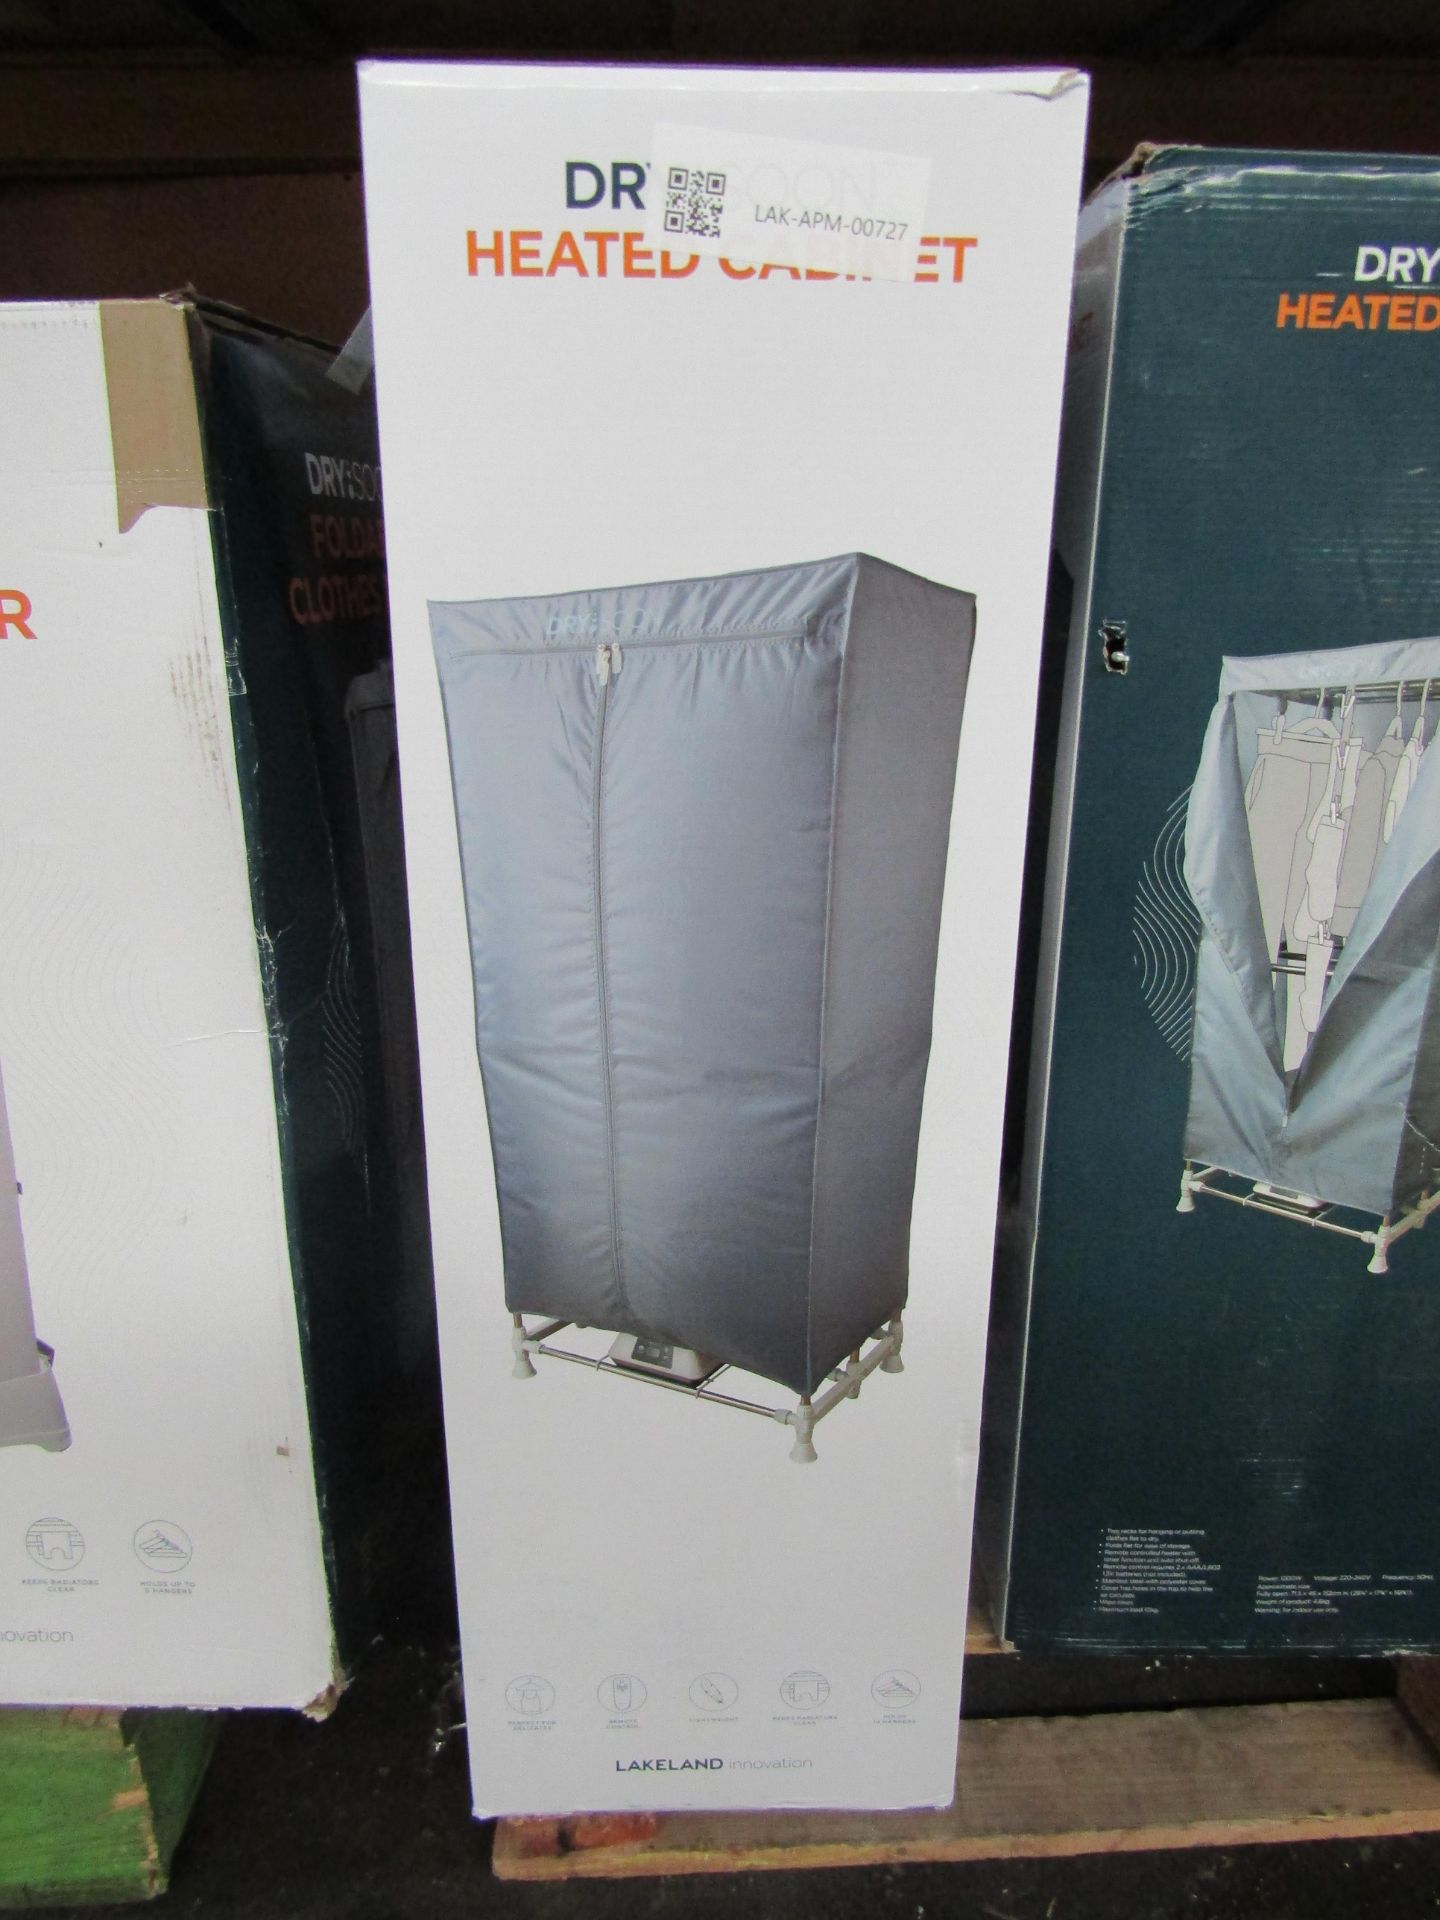 Dry:Soon Heated Cabinet RRP 91